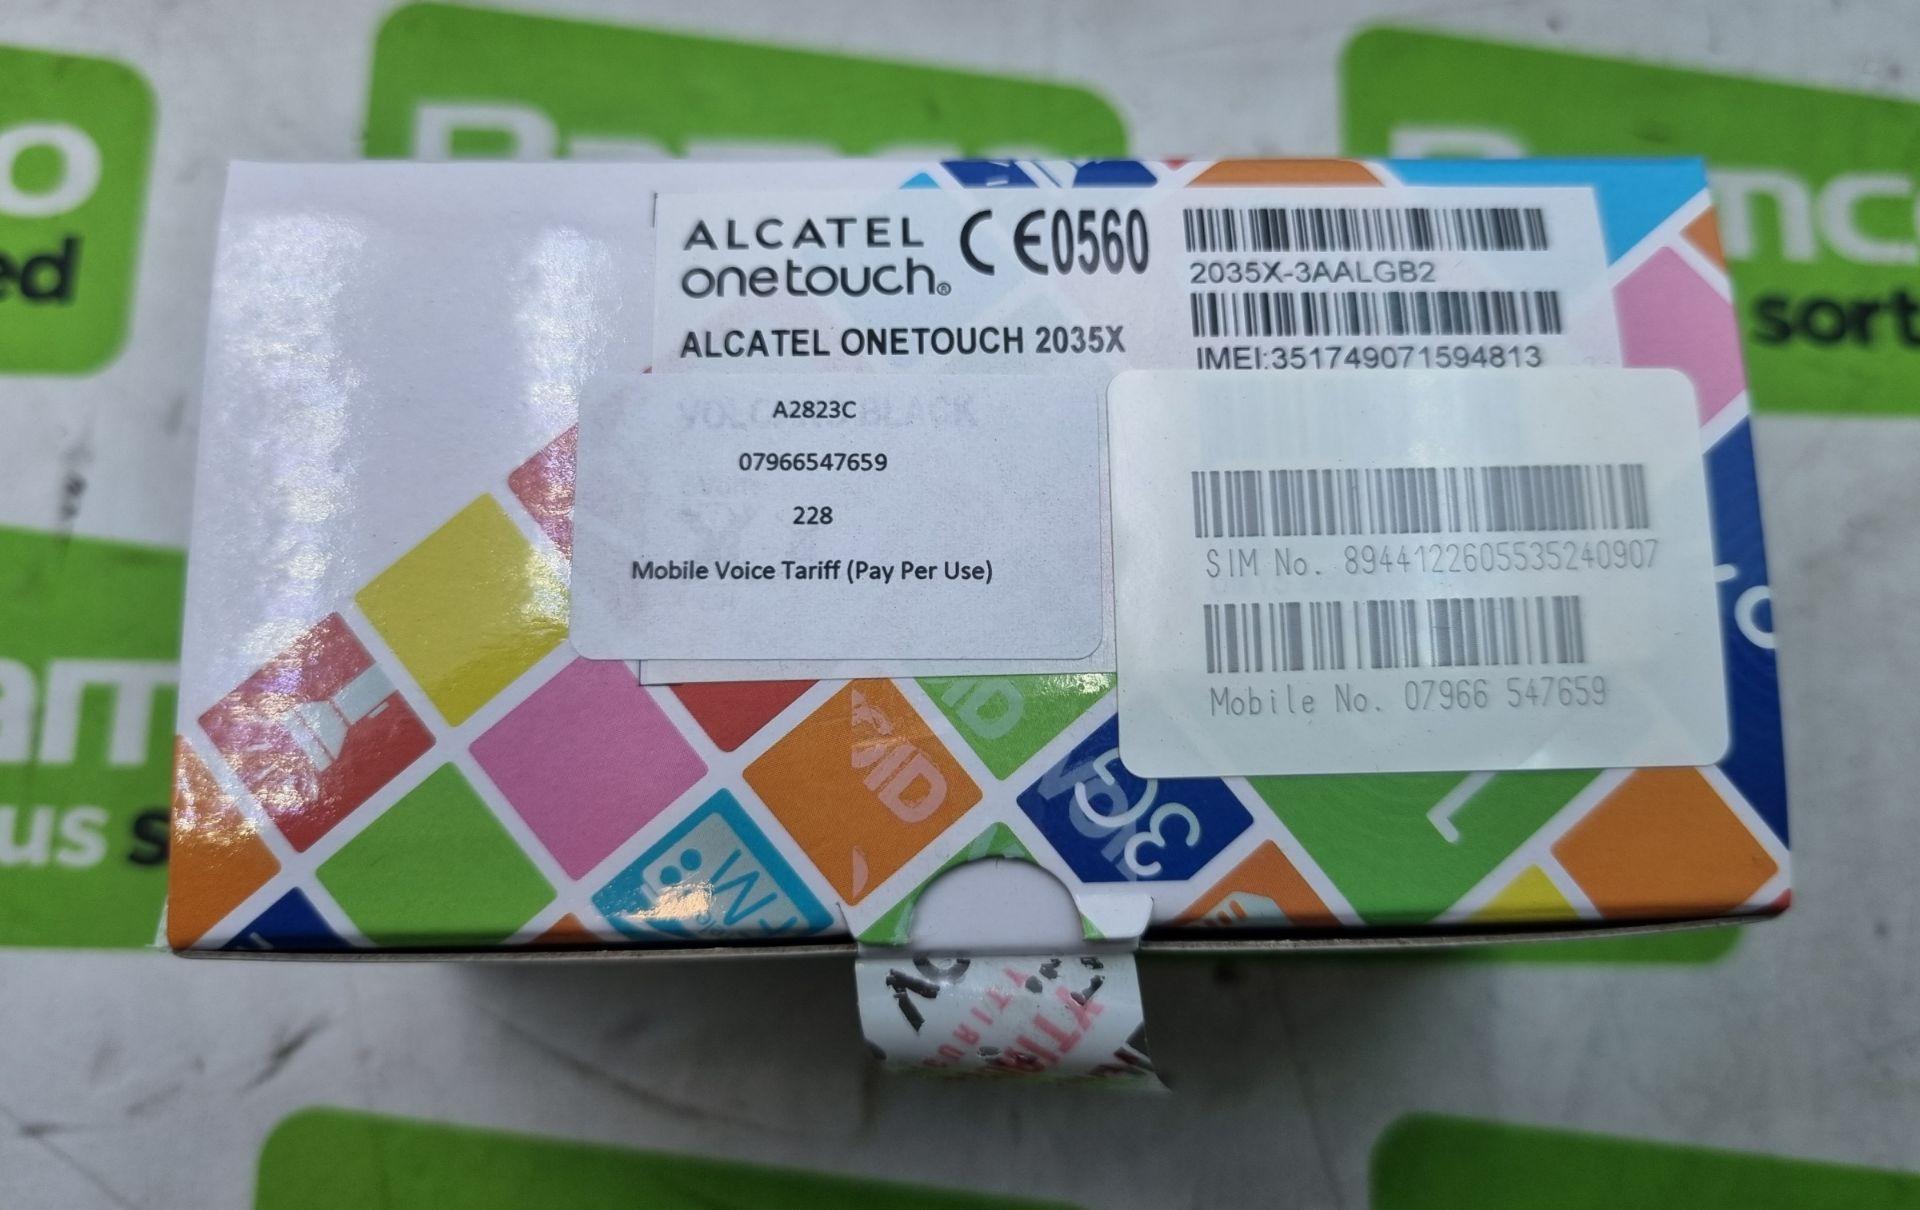 5x Alcatel 2035X One Touch Mobile Phones - Image 3 of 6